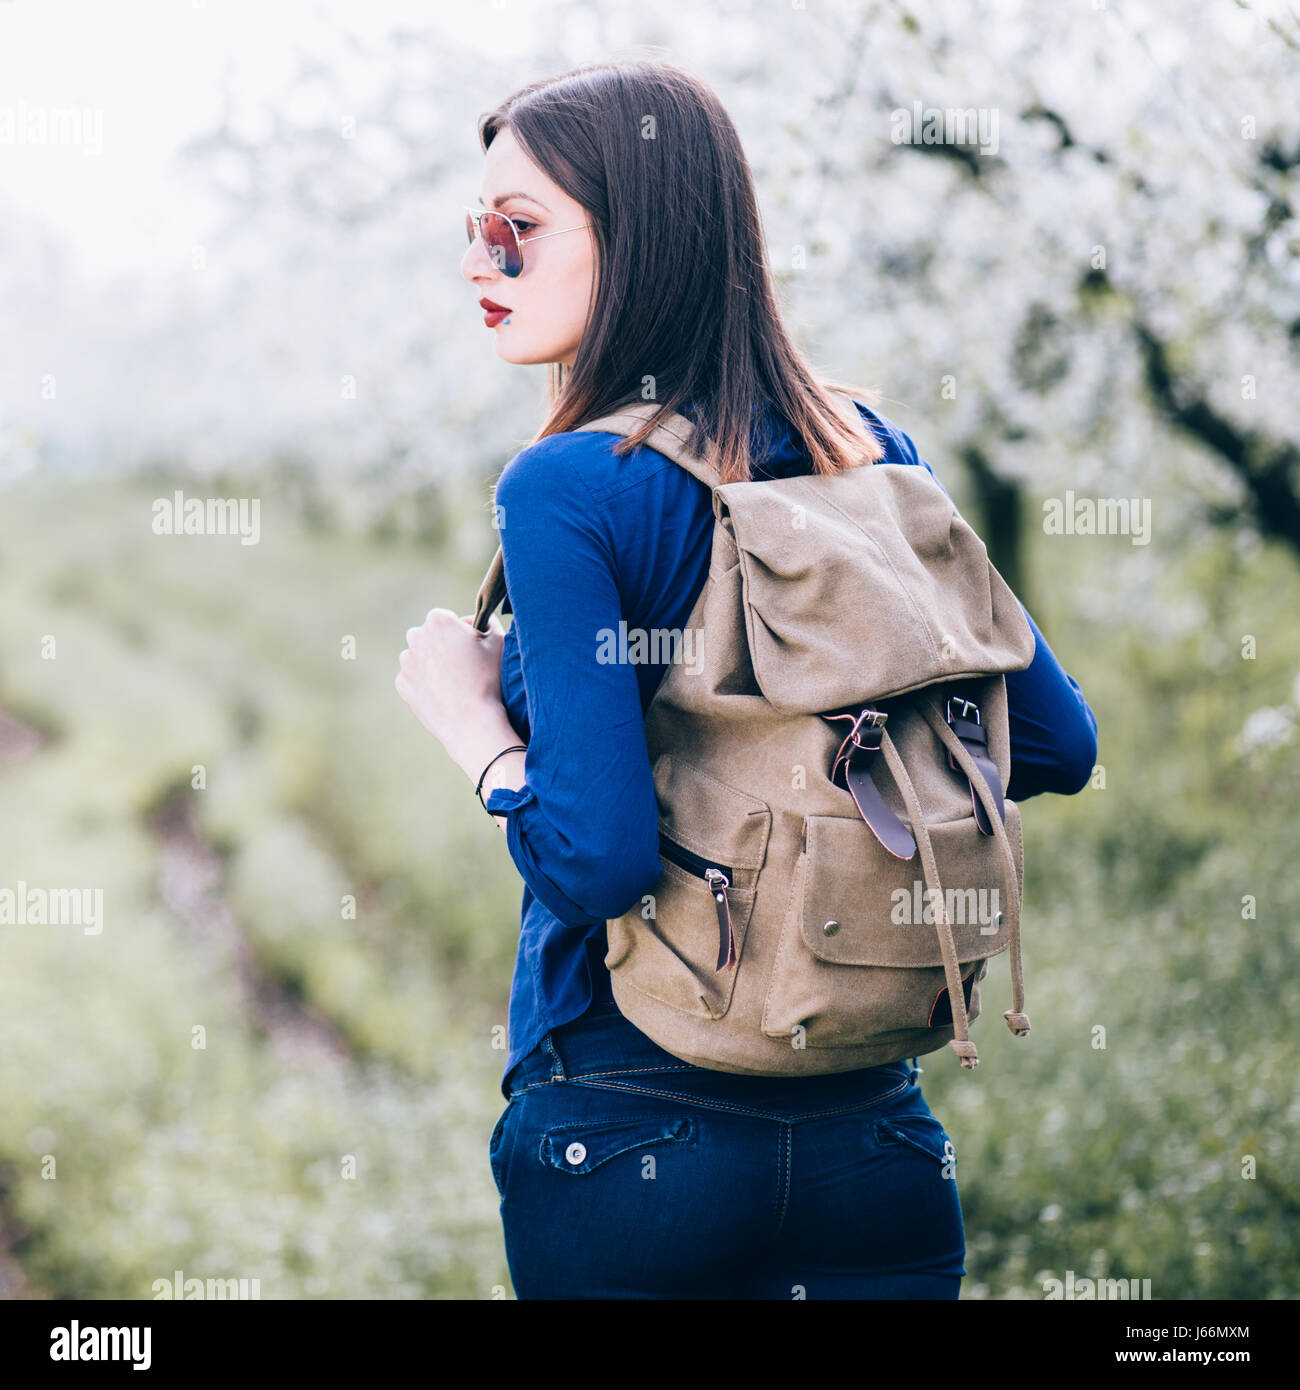 Young woman walking in nature Stock Photo